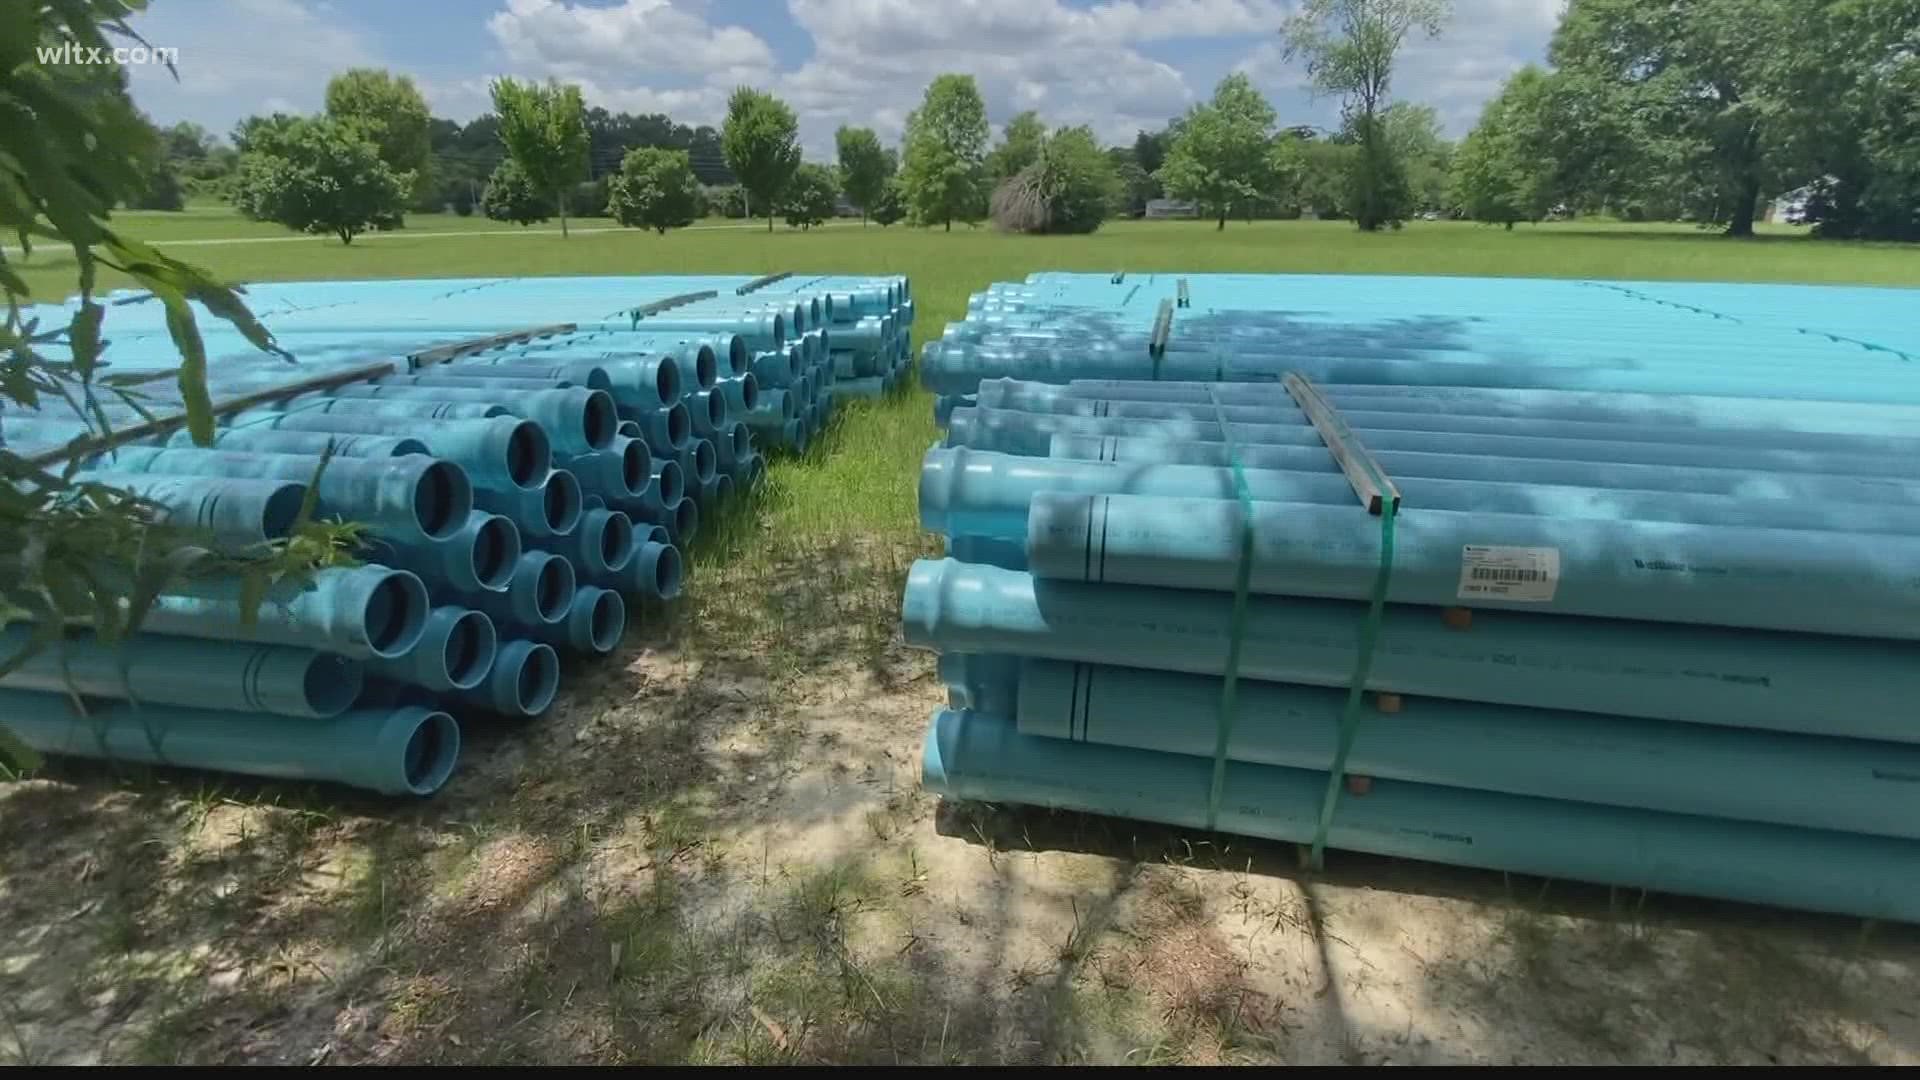 Those stacks of blue pipes on Broad Street in Camden are part of the first steps toward replacing Camden's water pipes.